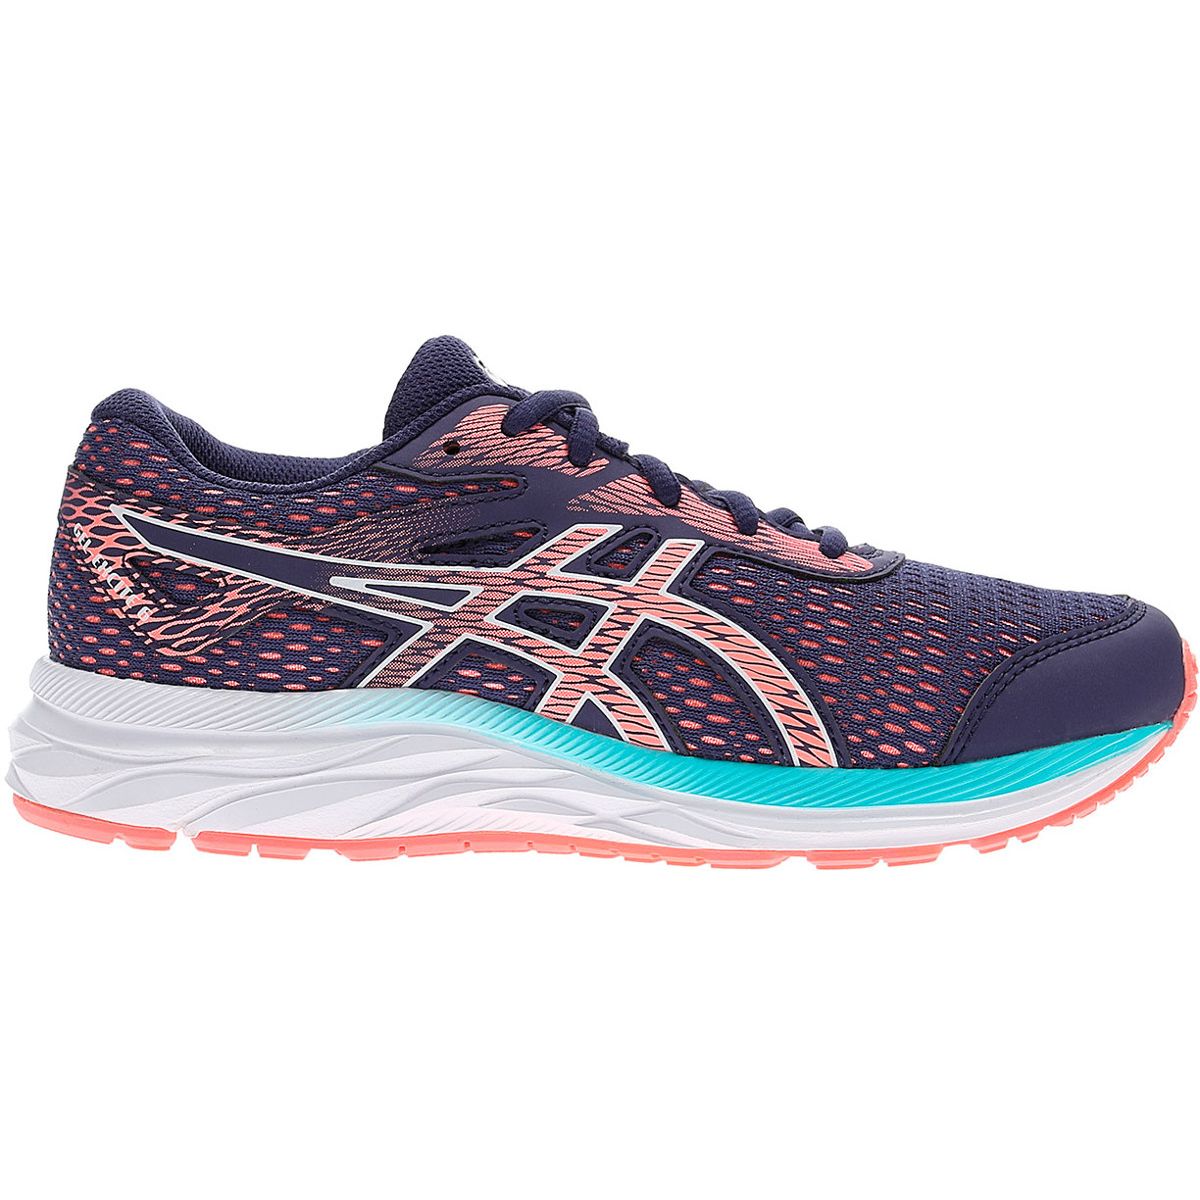 Asics Gel Excite 6 GS Junior Running Shoes 1014a079-500